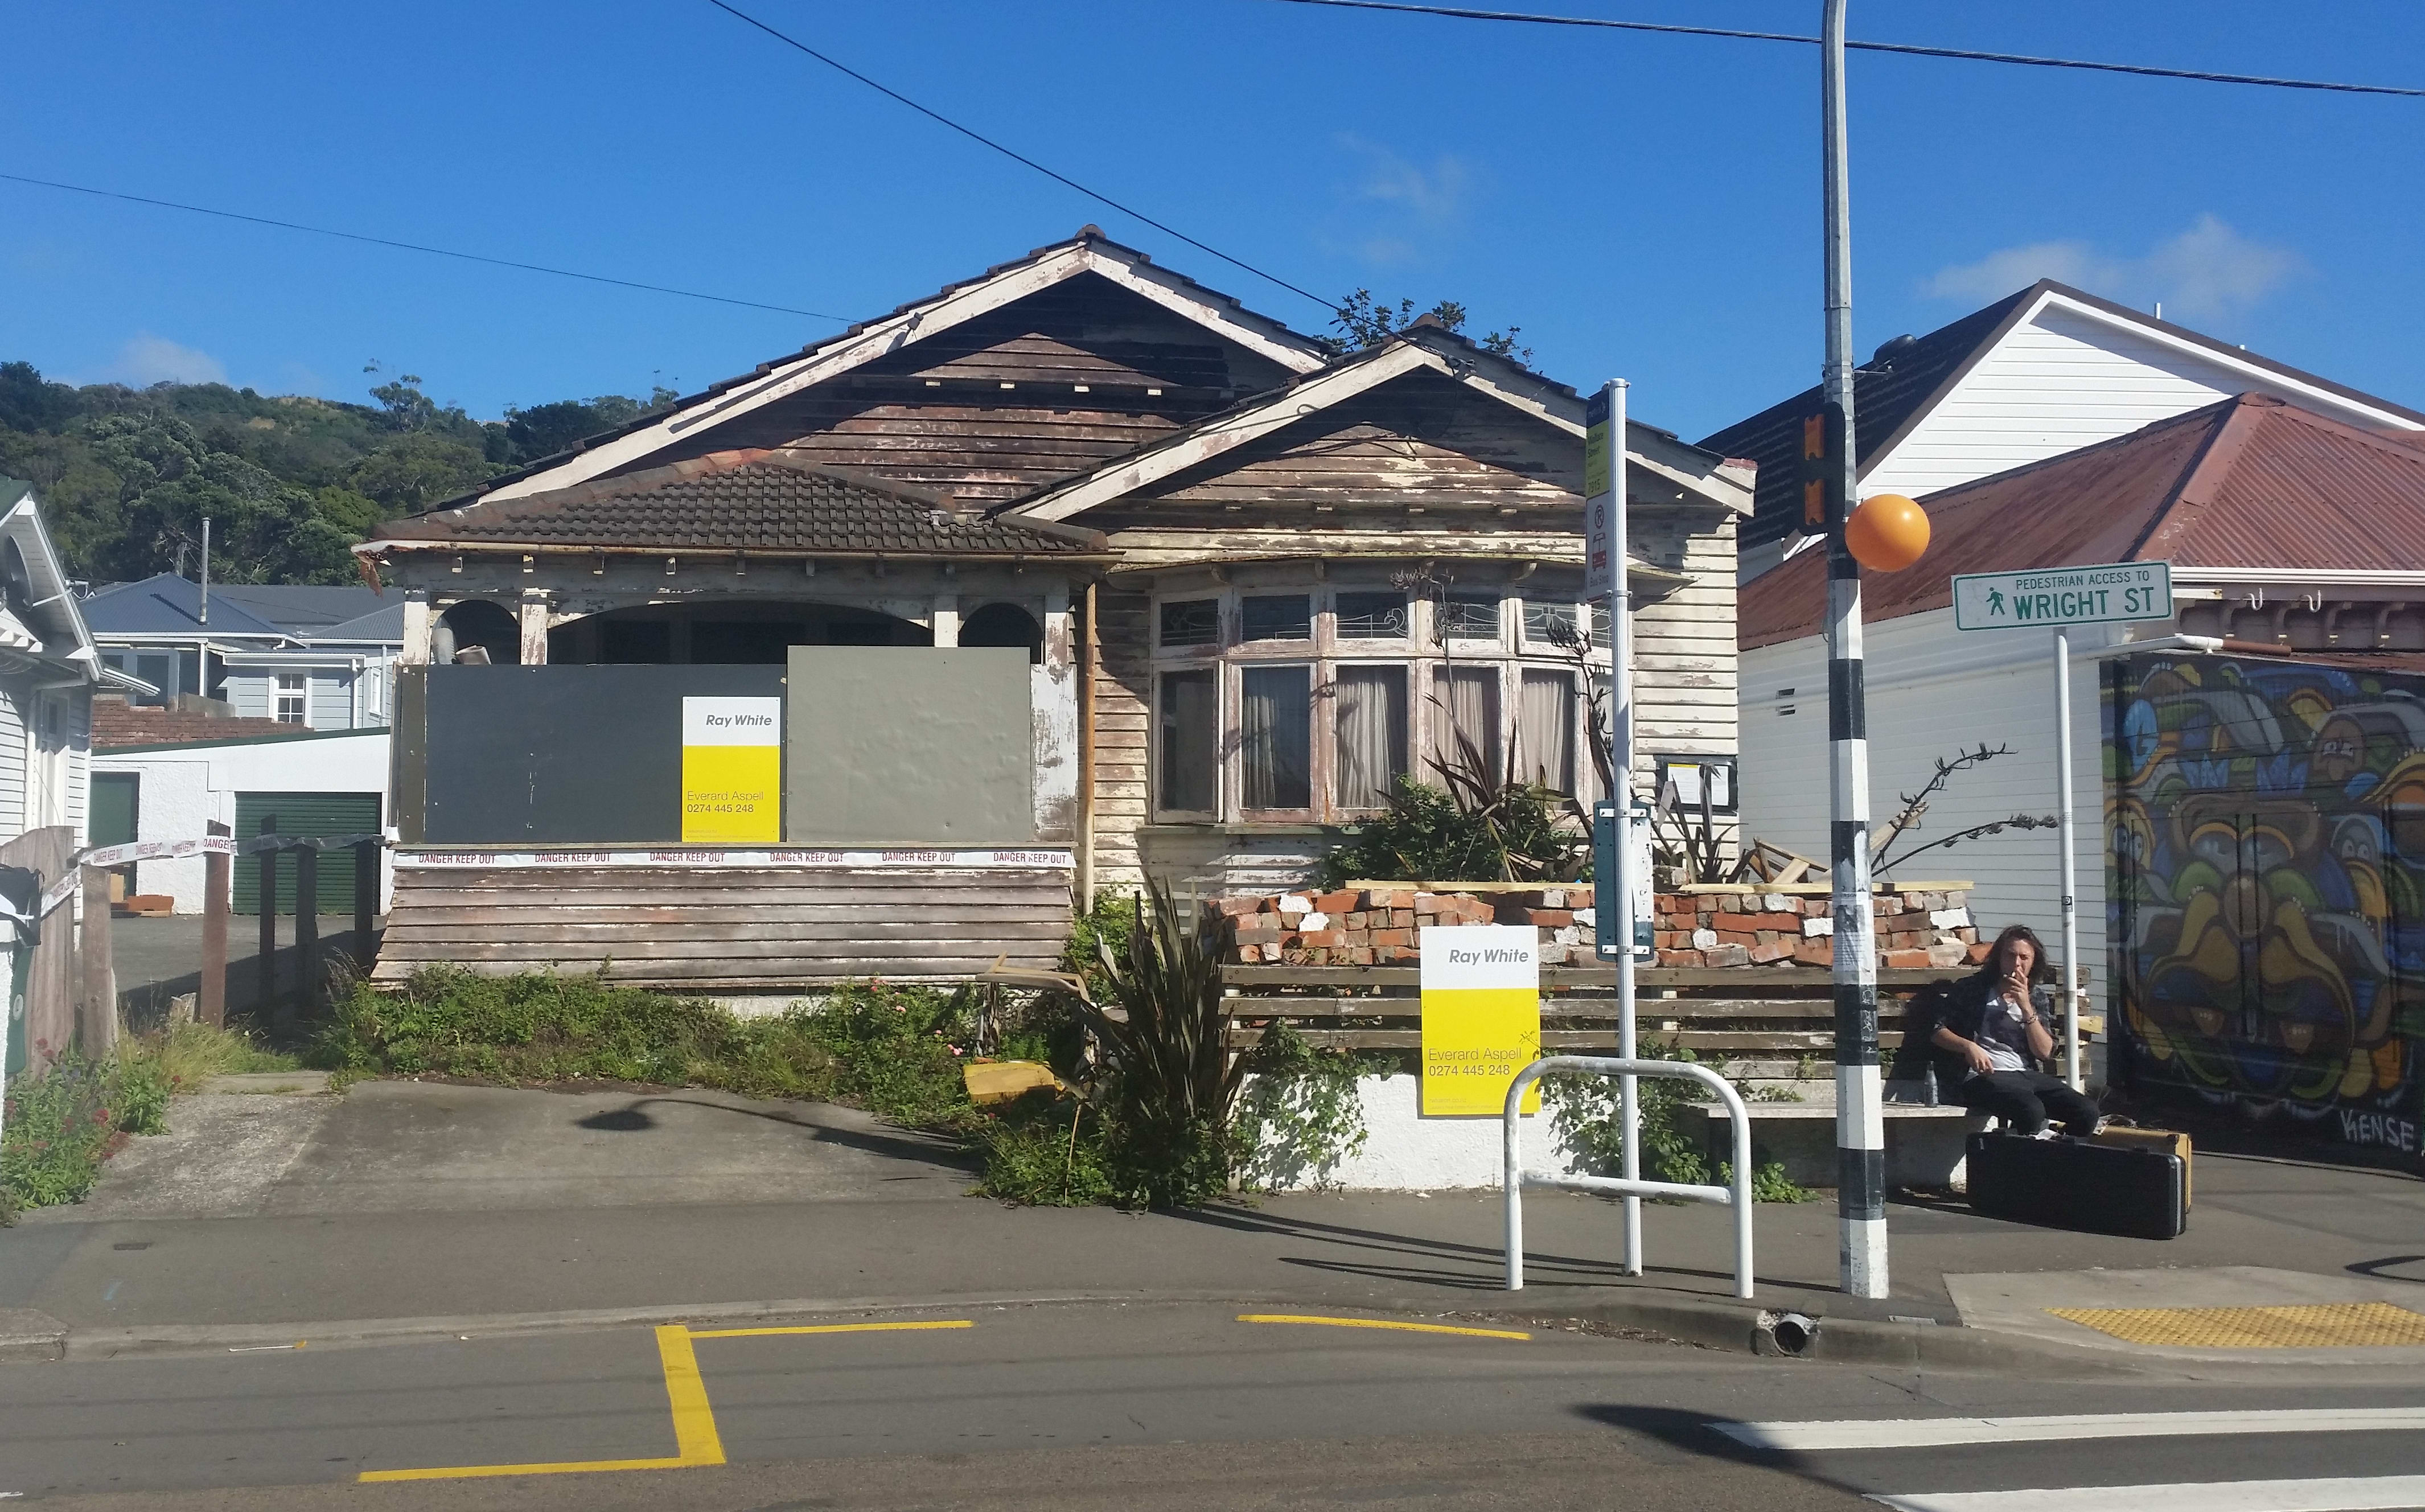 Run-down Wellington house selling for more than half a million dollars